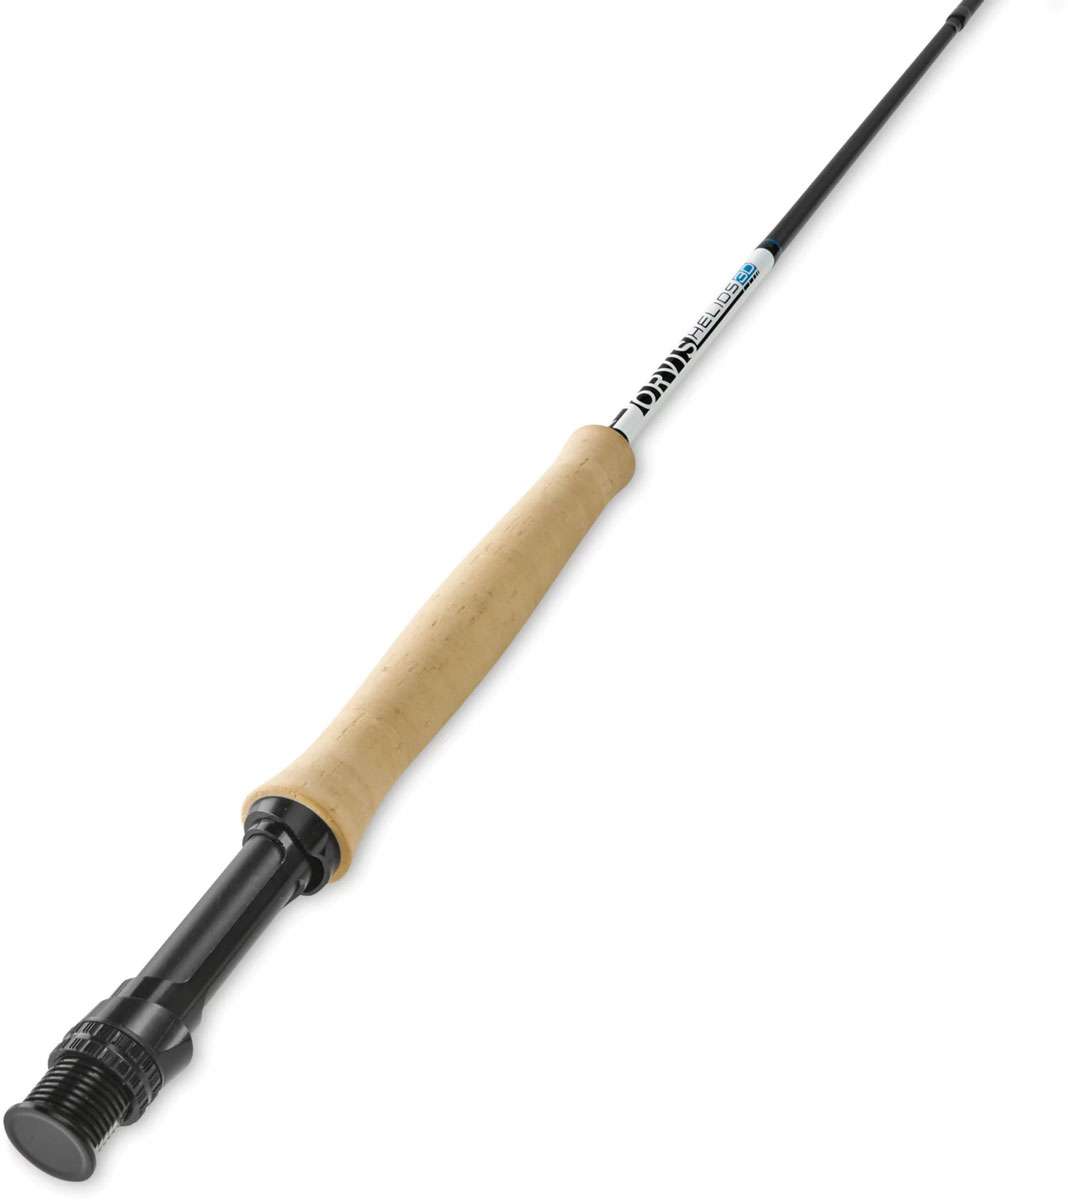 Orvis helios 2 switch rod 5wt review - assetmyte